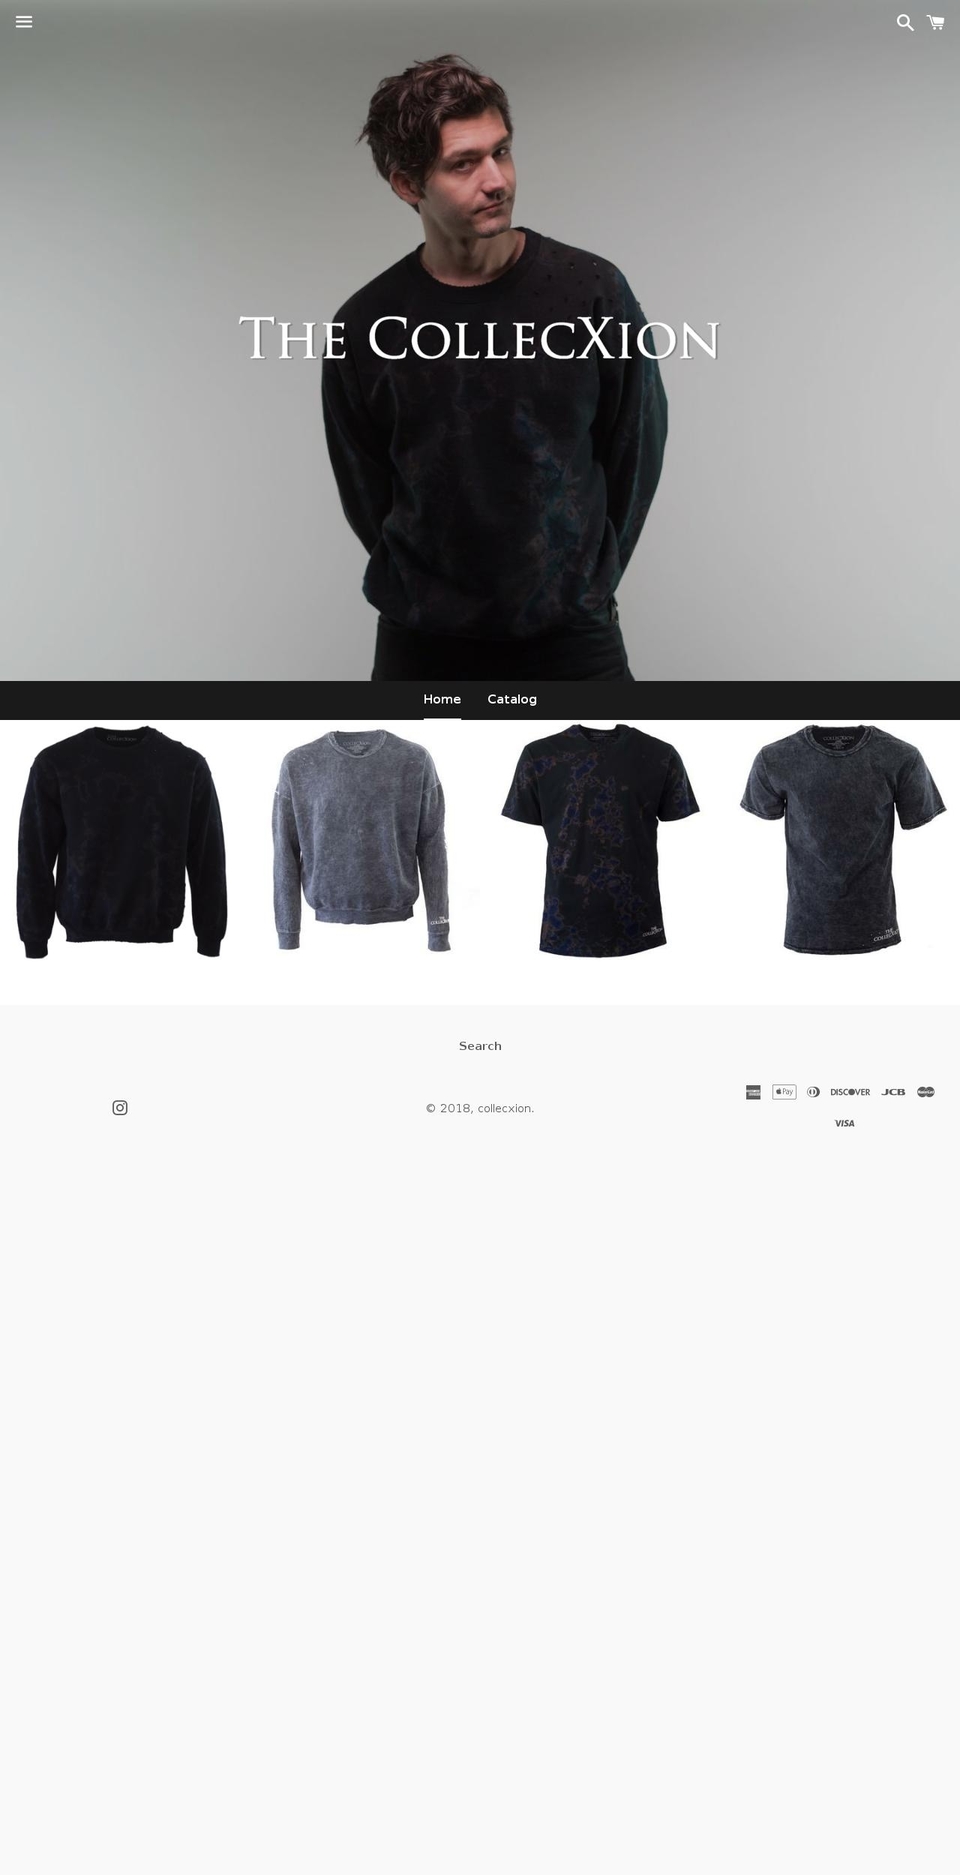 Copy of Boundless Shopify theme site example collecxion.com